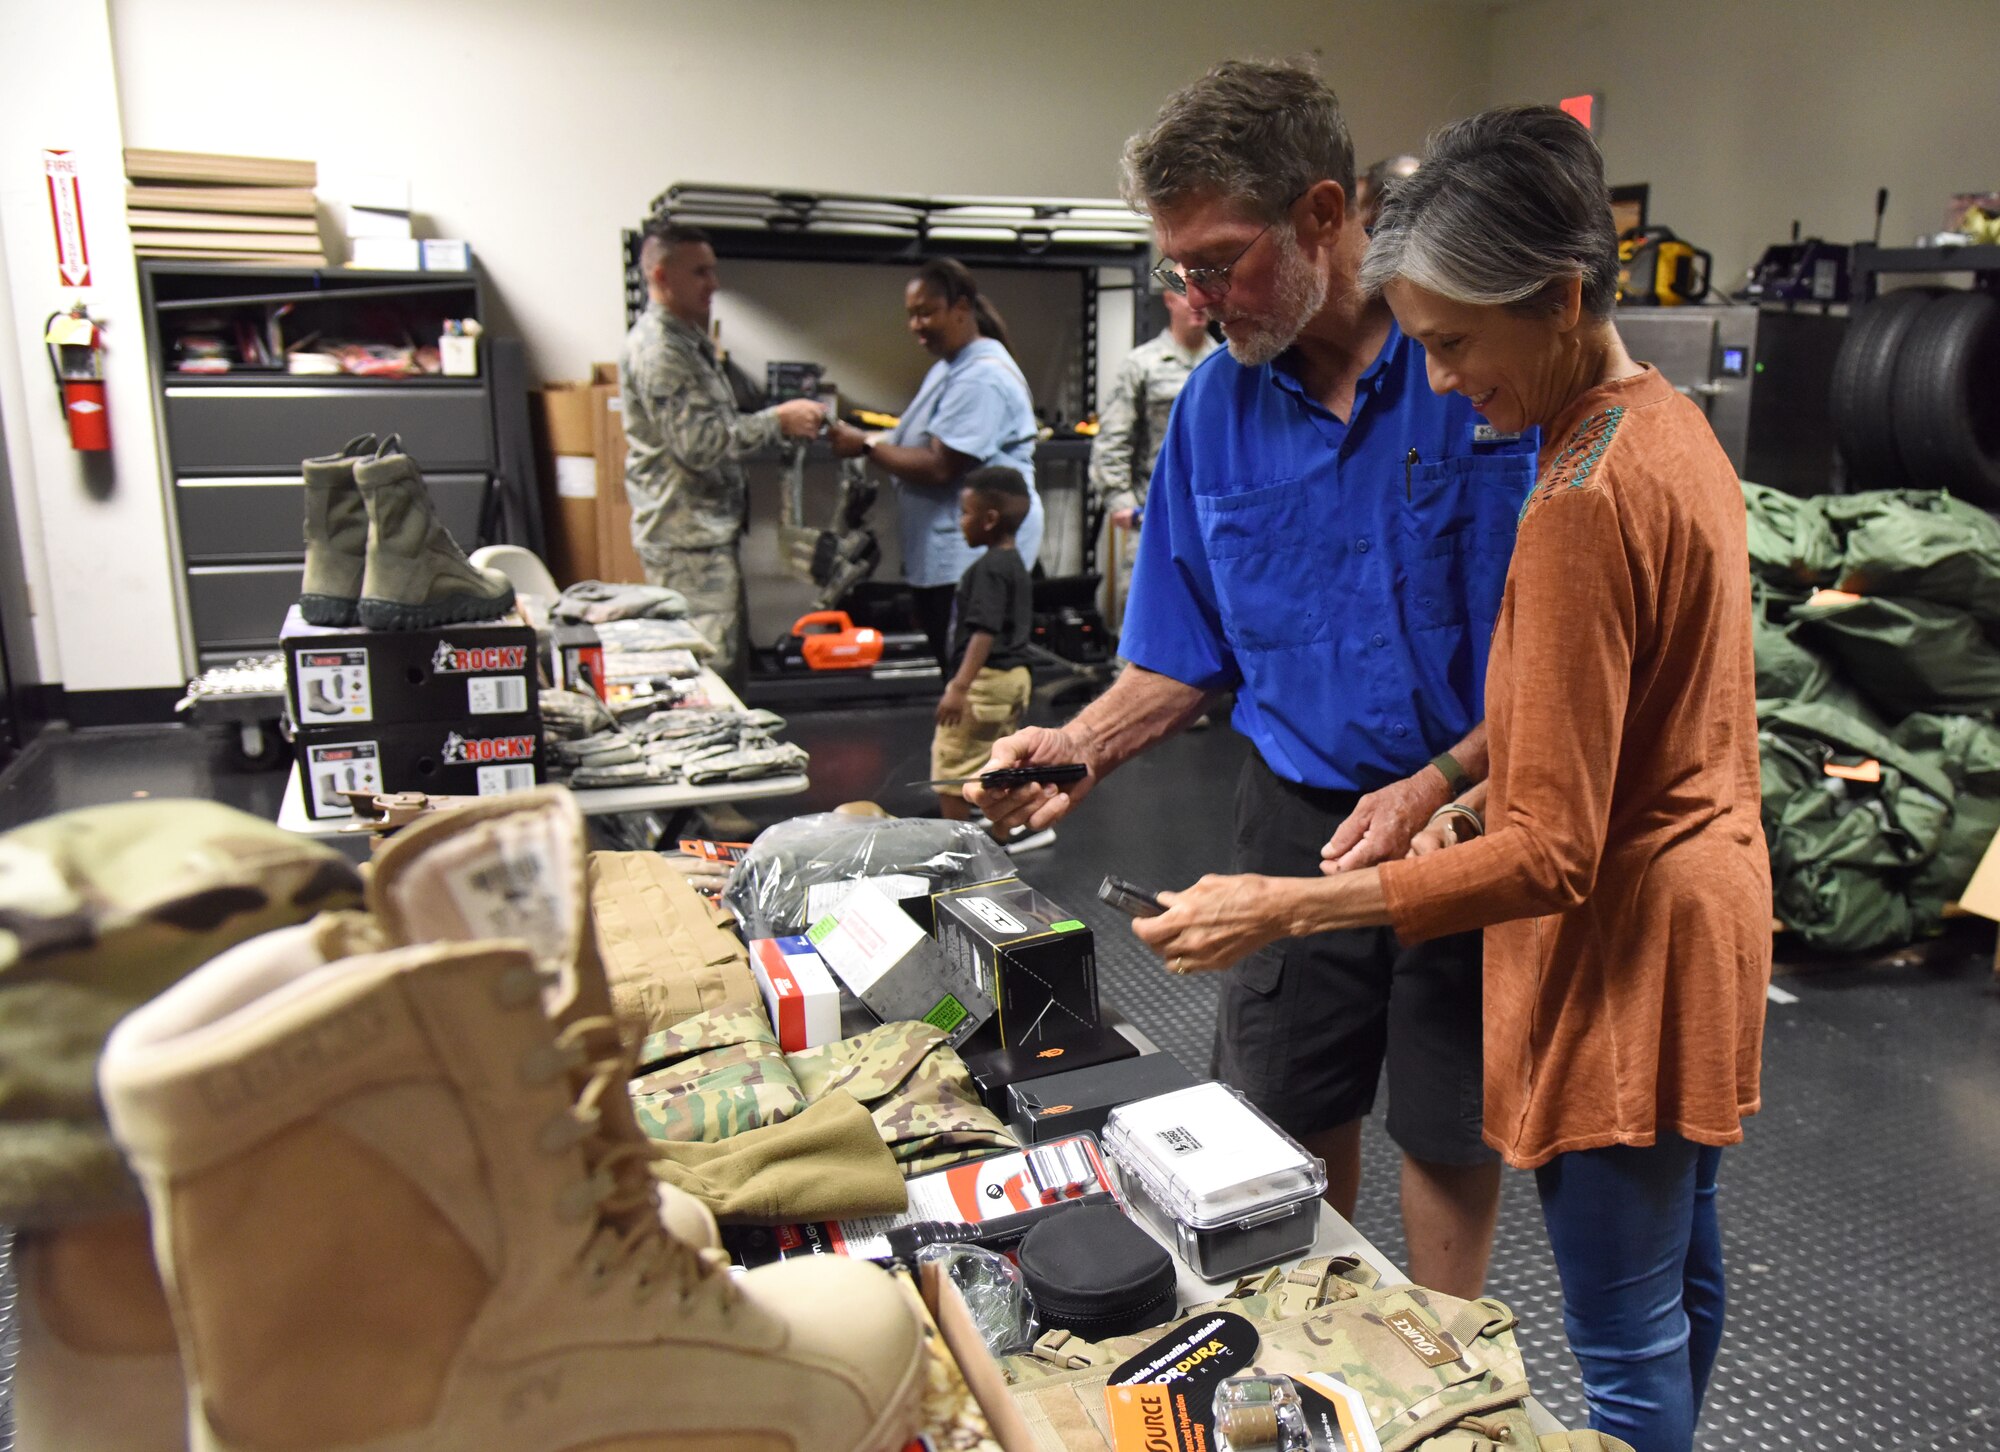 Brad and Cindy Bordes, grandparents of U.S. Air Force Airman Noah Hill, 81st Security Forces Squadron entry controller, inspect uniforms and equipment worn by 81st SFS Airmen during the 81st SFS open house at Keesler Air Force Base, Mississippi, May 17, 2018. The open house allowed individuals to walk through a day in the life of a defender. The event was held during National Police Week, which recognizes the service of law enforcement men and women who put their lives at risk every day. (U.S. Air Force photo by Kemberly Groue)